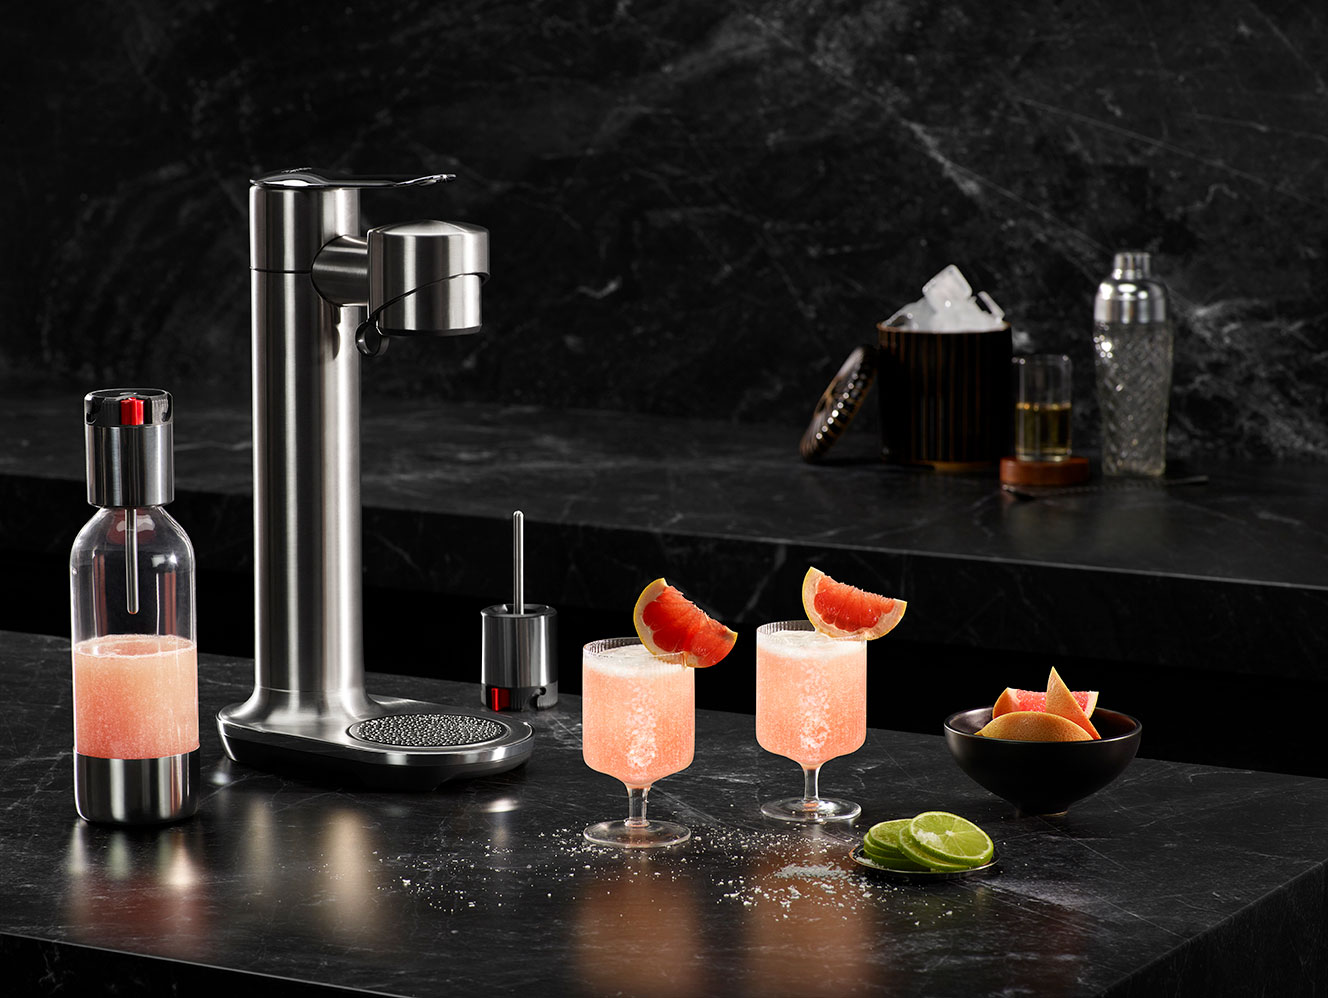 InFizz™ Fusion by Breville